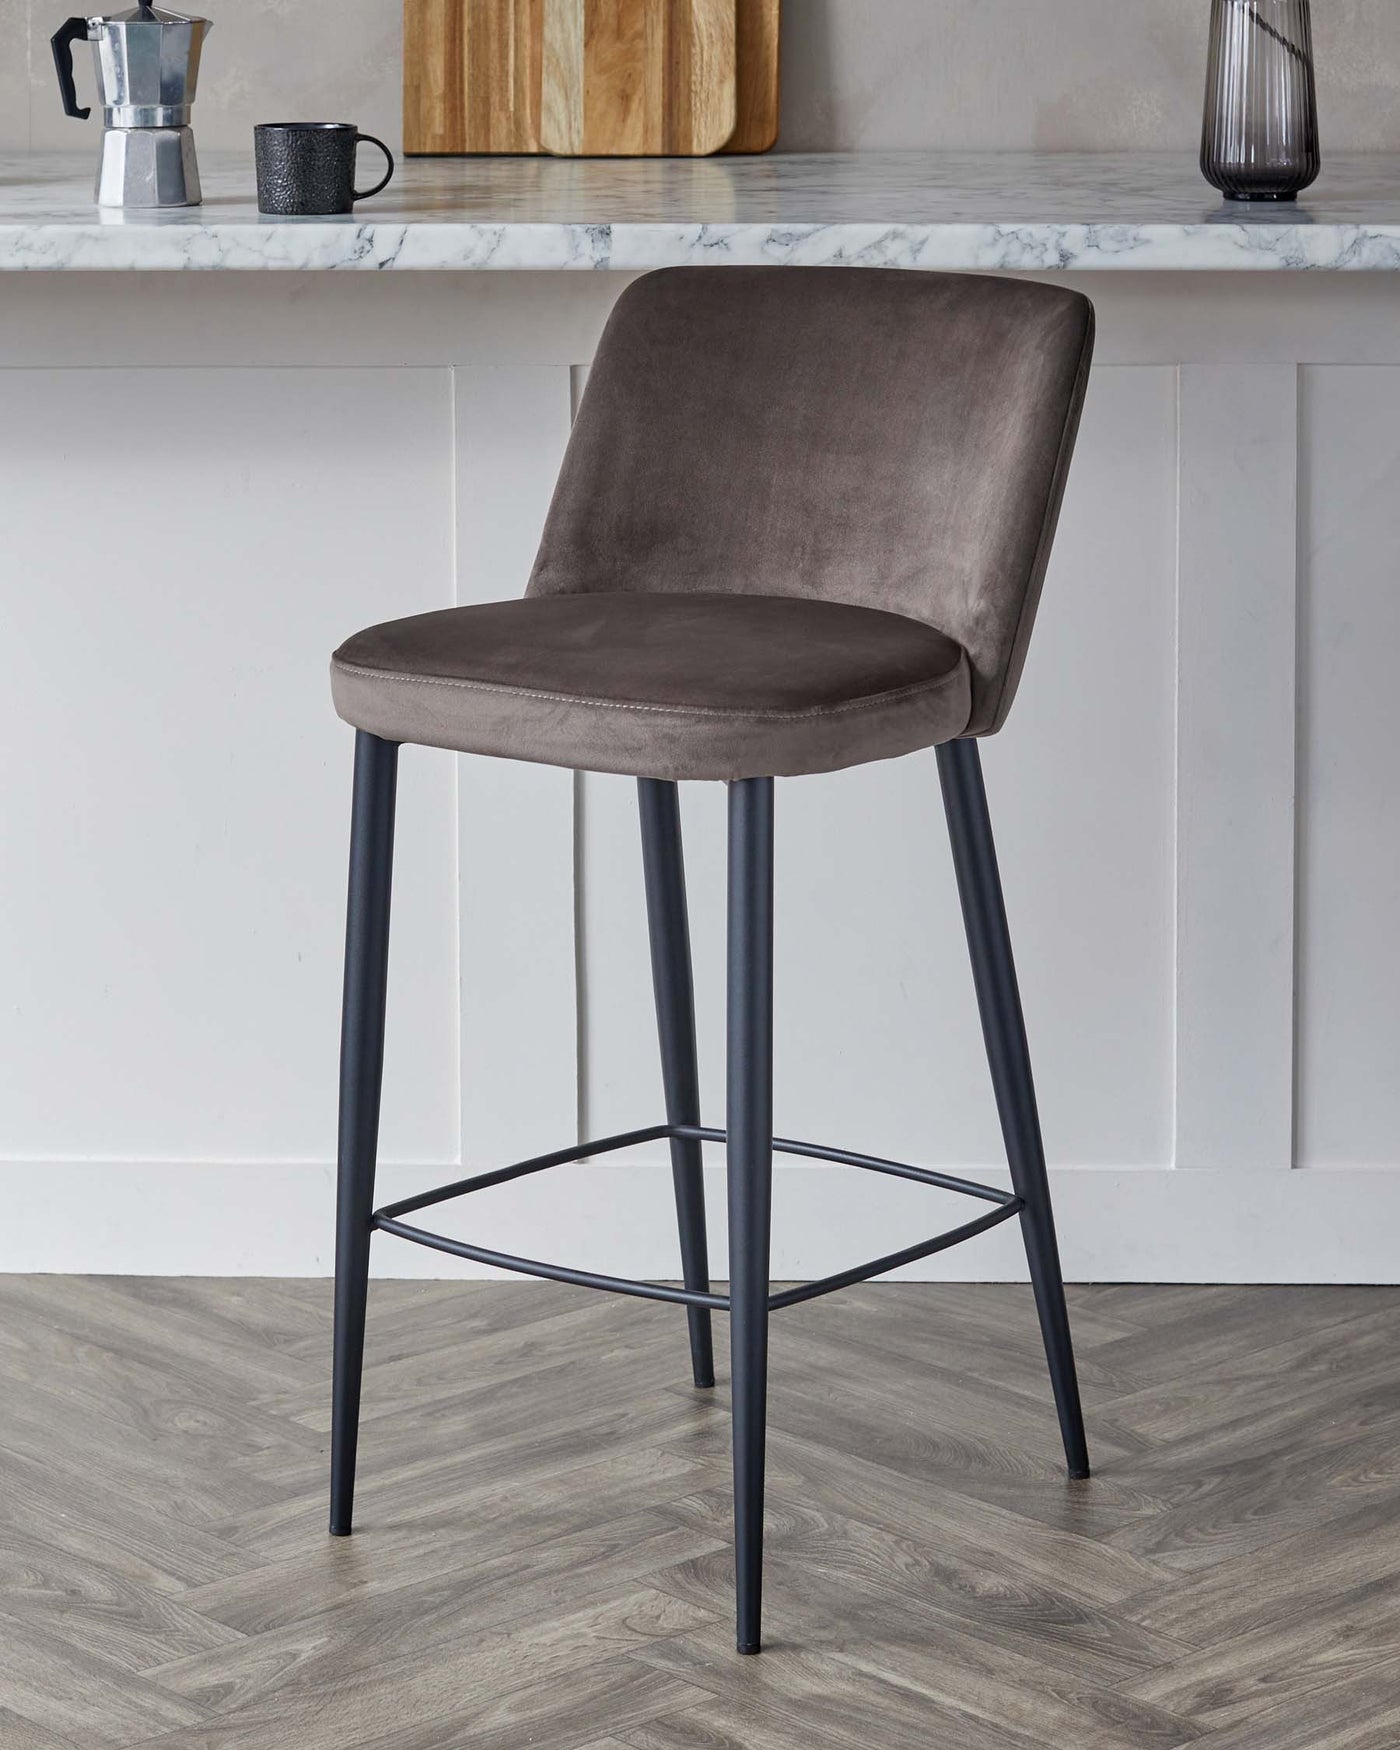 Contemporary bar stool featuring a curved back, cushioned seat upholstered in grey velvet fabric, and sleek black metal legs with a footrest.